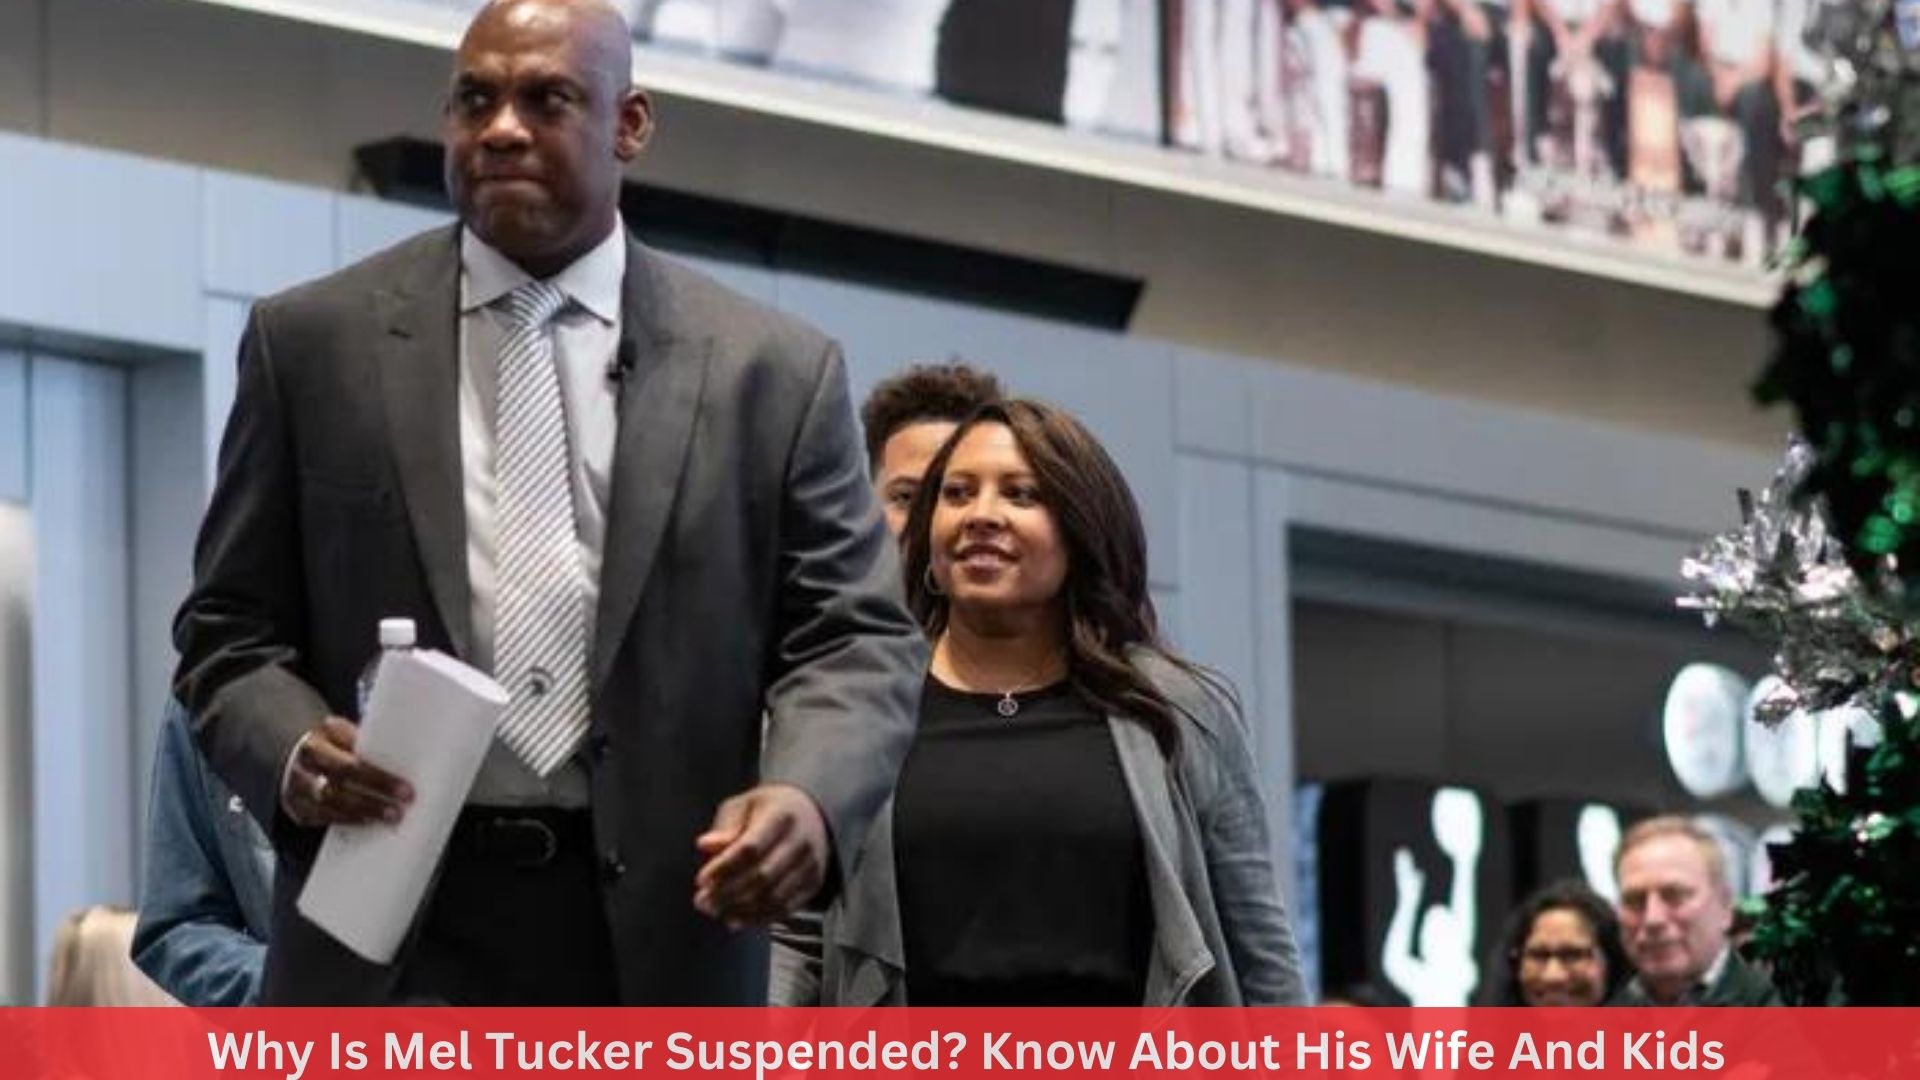 Why Is Mel Tucker Suspended? Know About His Wife And Kids